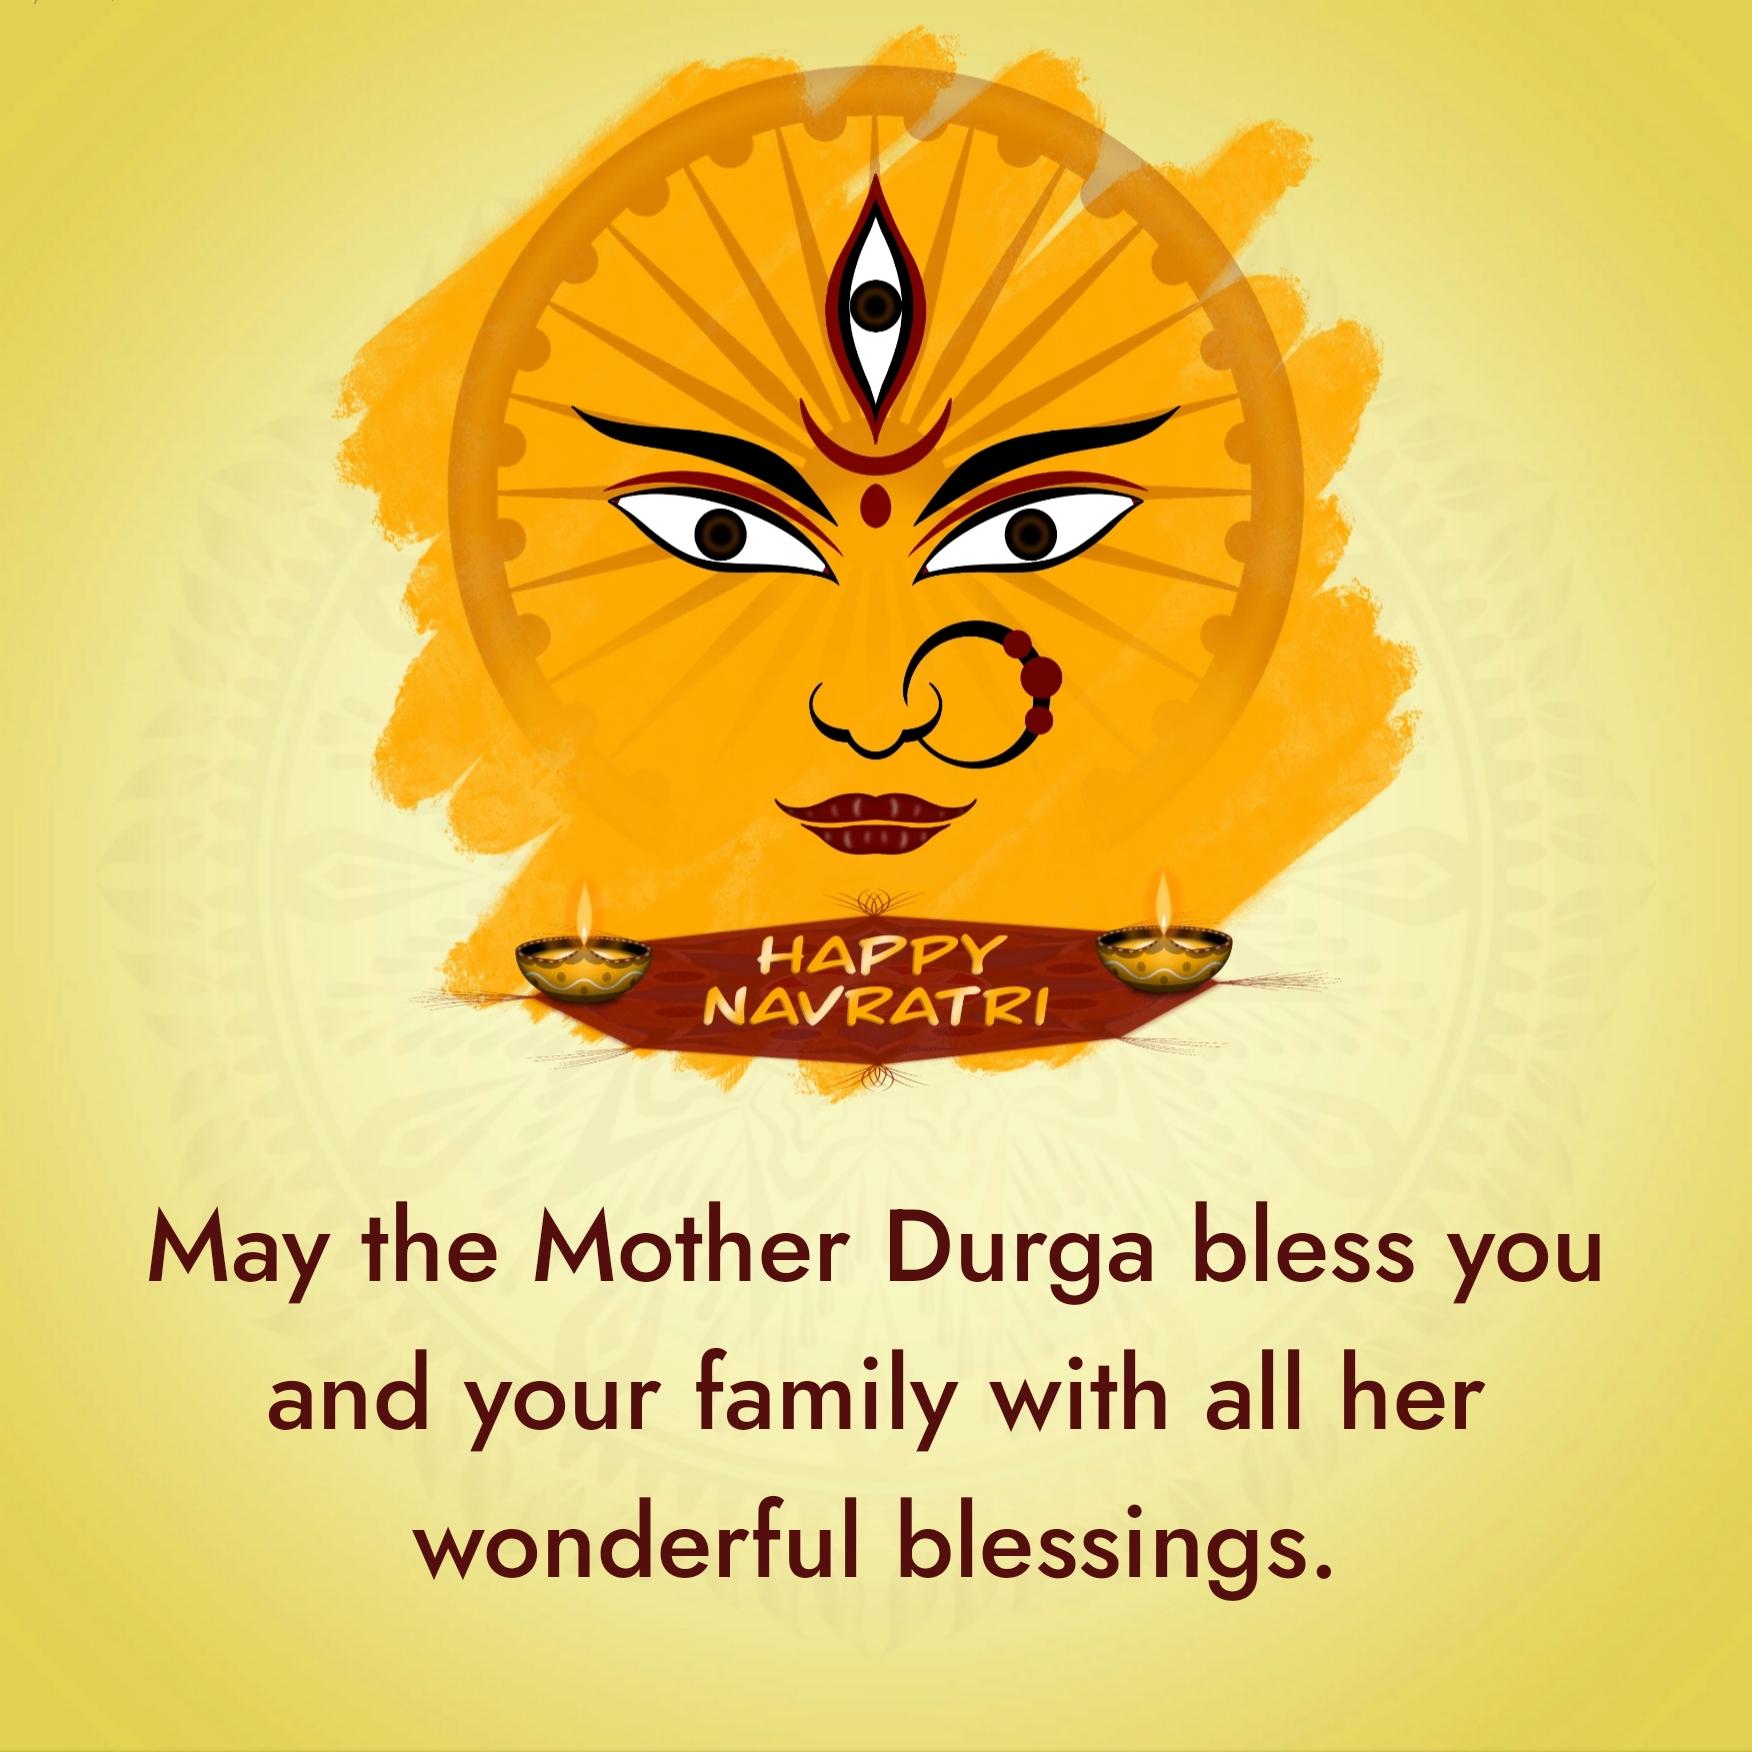 May the Mother Durga bless you and your family